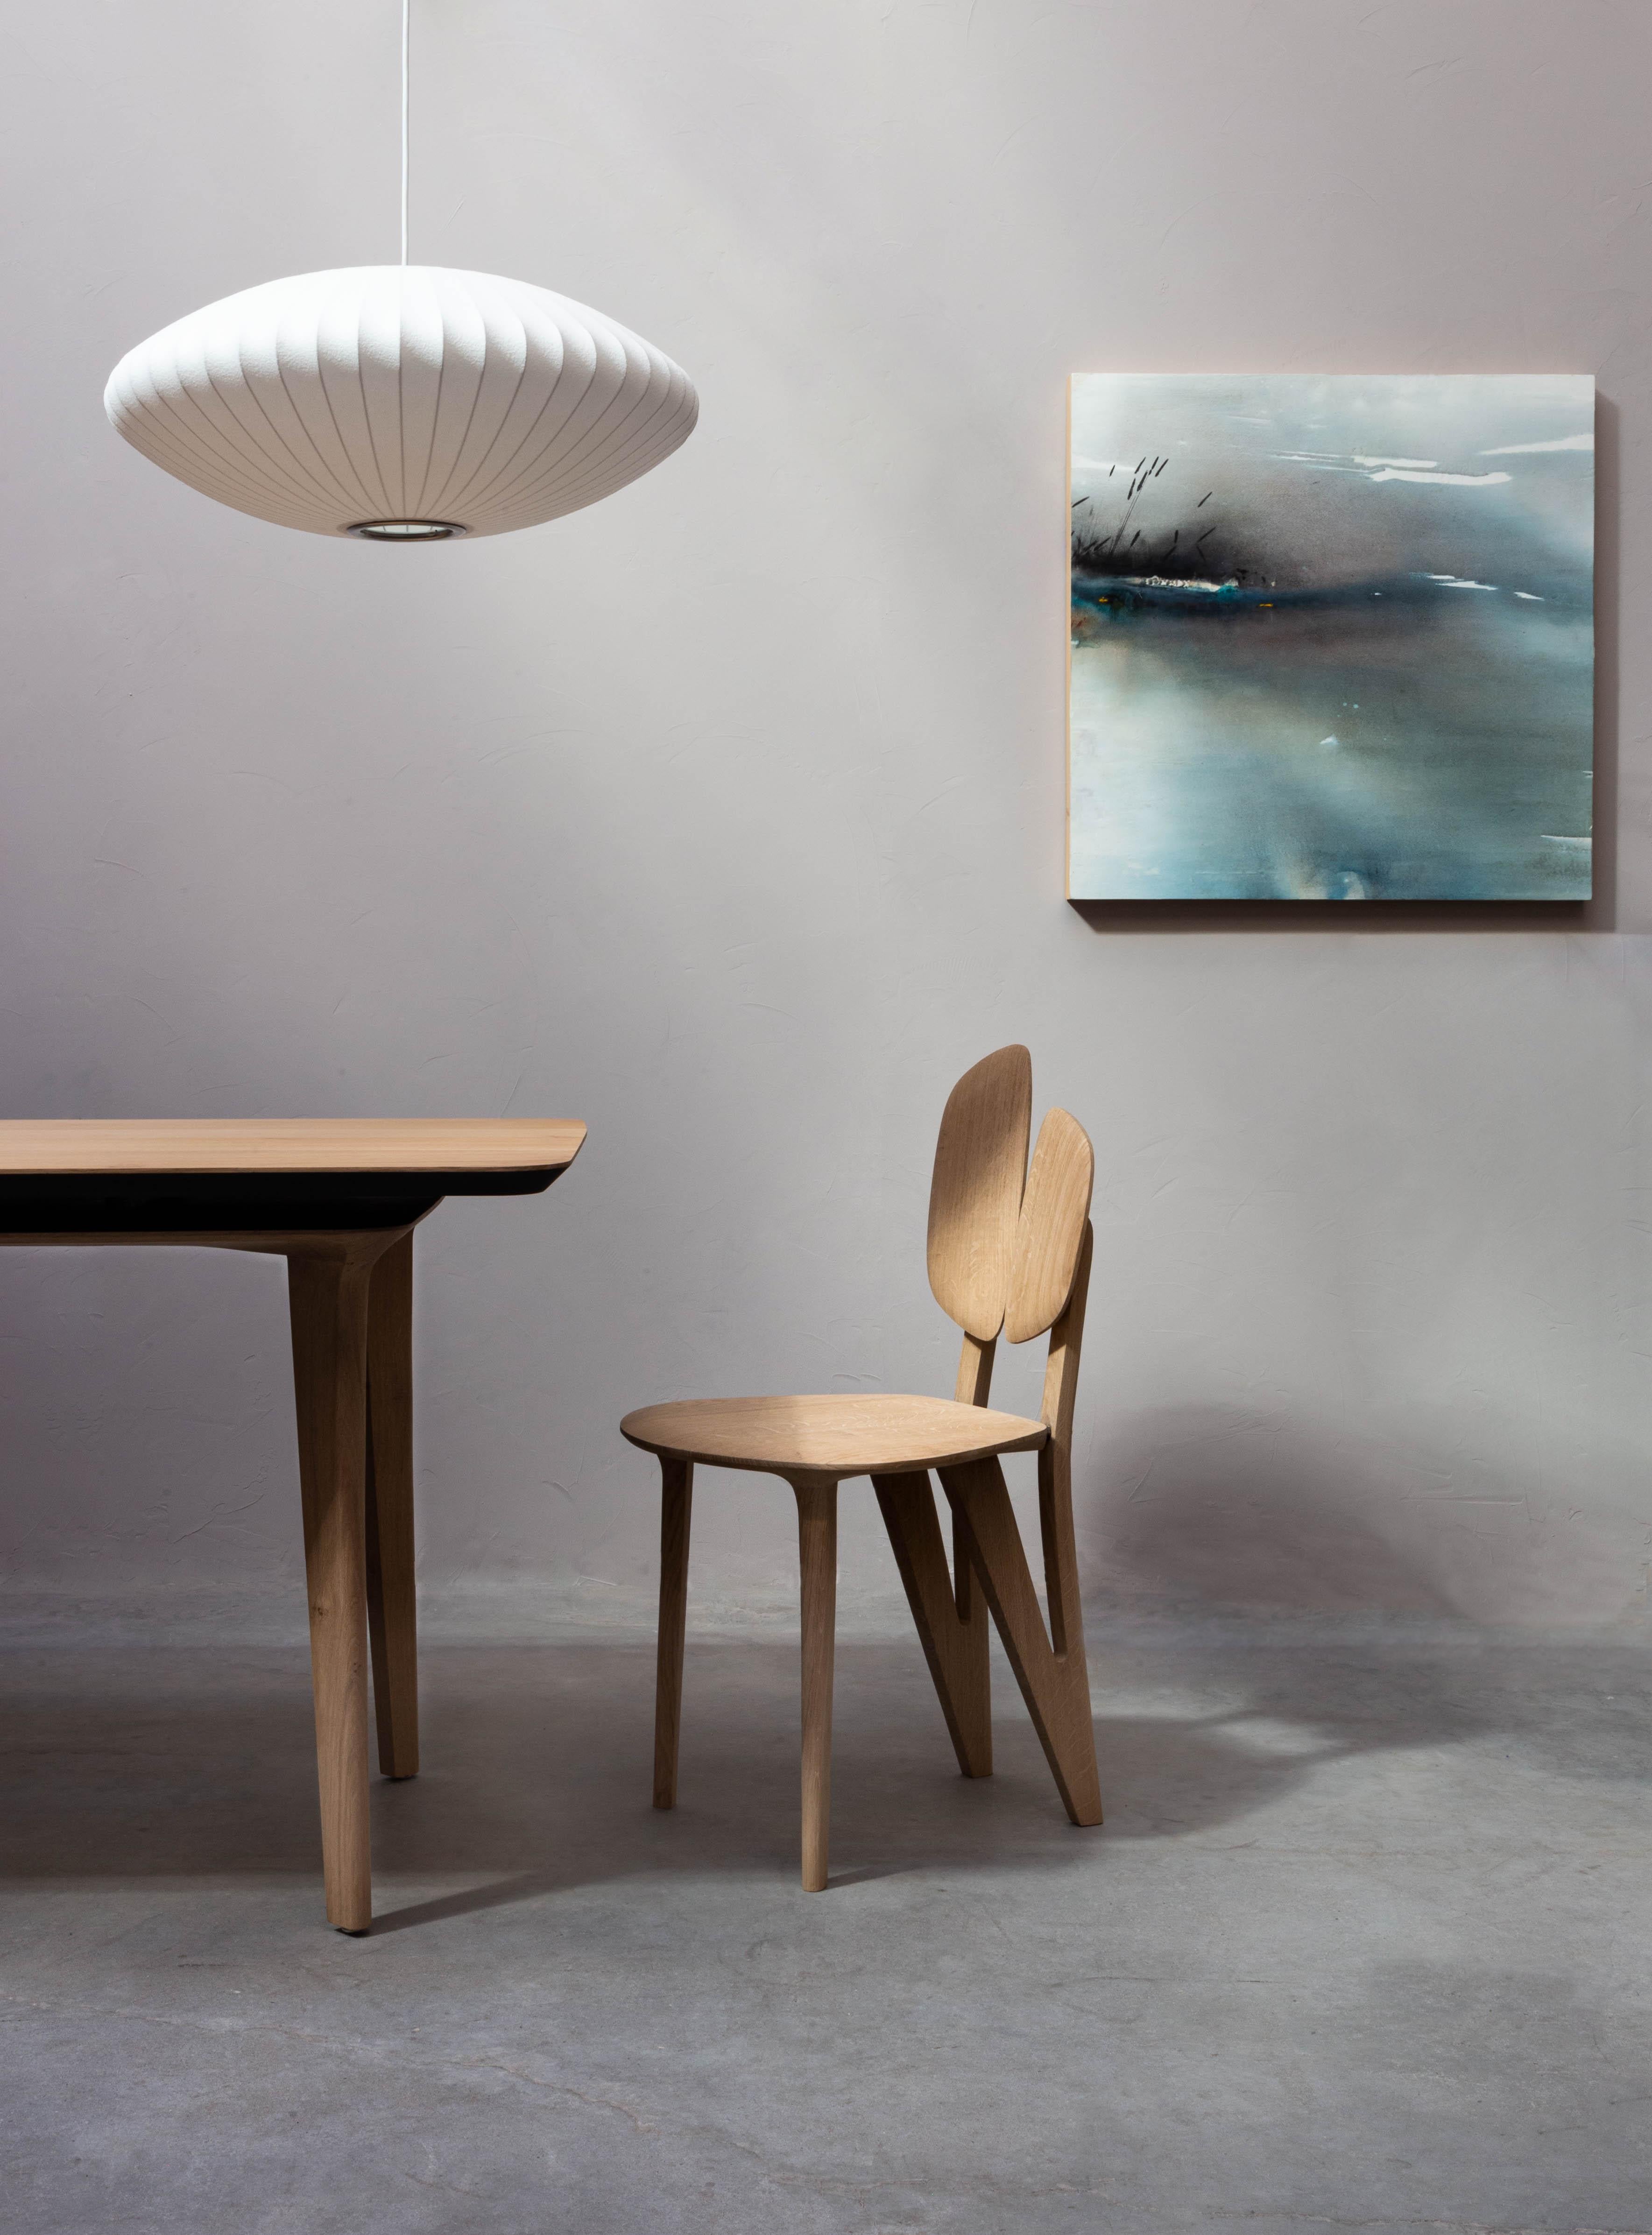 Pétiole chair in natural oak wood made by the designer Alexandre Labruyère. We offer the possibility to choose the color of the wood.

Dimensions: Total H 33.46? x20.07? x 17.71?

Alexandre Labruyère is a designer of contemporary furniture and